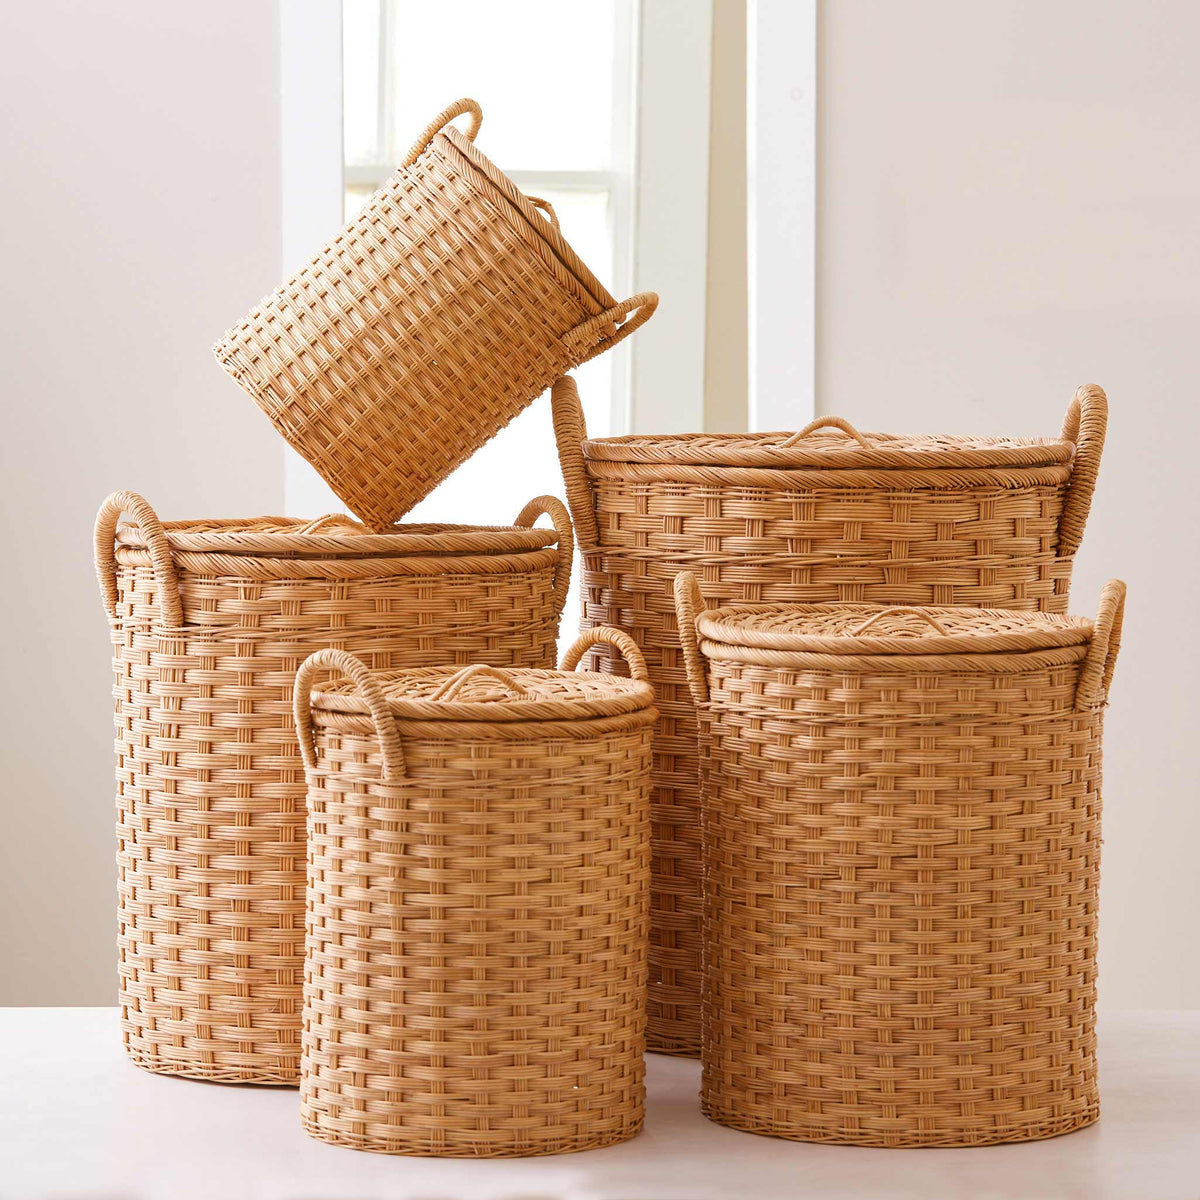 Round rattan storage baskets with lids and handles. Perfect baskets for clothes, bathroom storage baskets, or baskets for shelves. XL, L, M, S, XS.